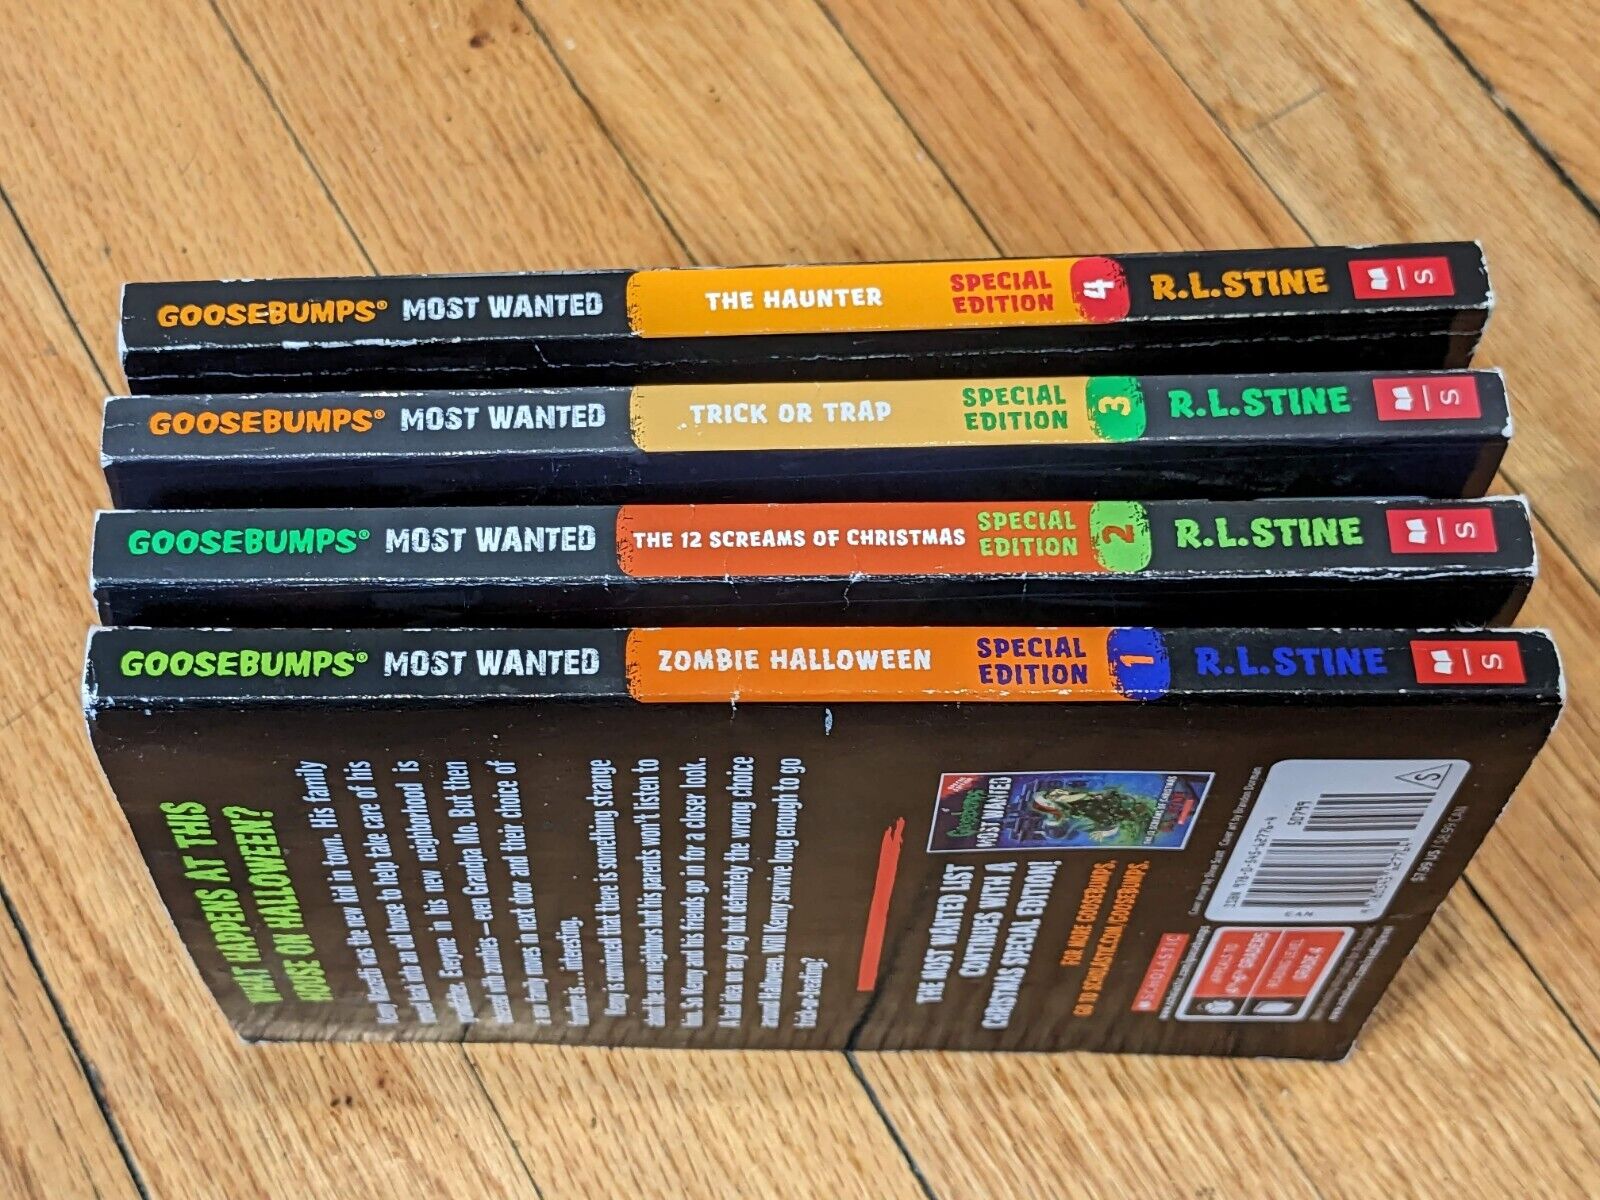 GOOSEBUMPS MOST WANTED 4 Pack - RL Stine Set SPECIAL Editions Books 1-4 - Asylum Books